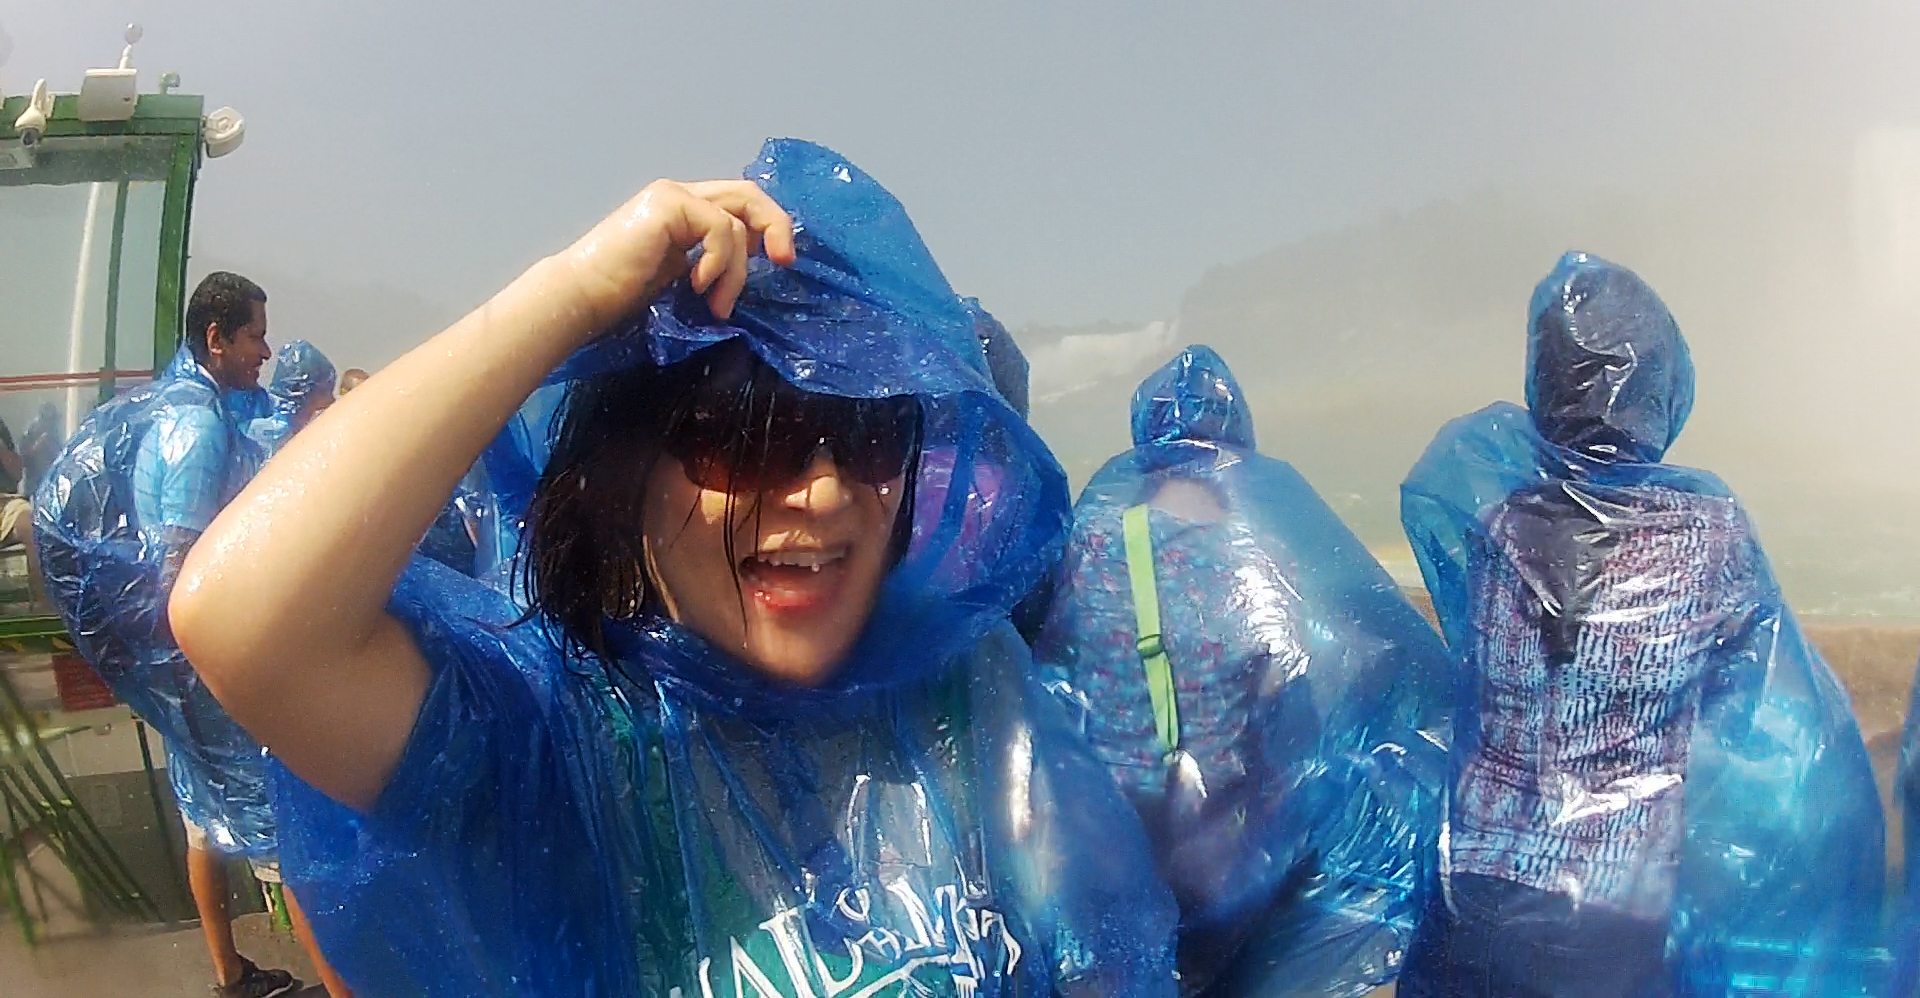 Niagara Falls American Side Tour With Maid Of The Mist Boat Ride - 